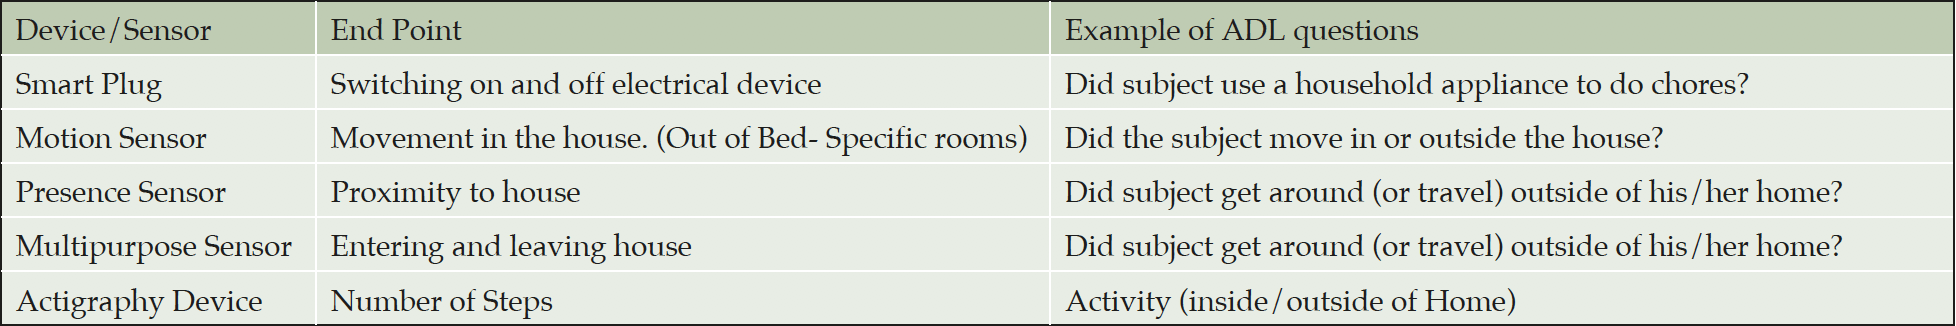 Table 1. Objective Sensor data and related ADL question (7)